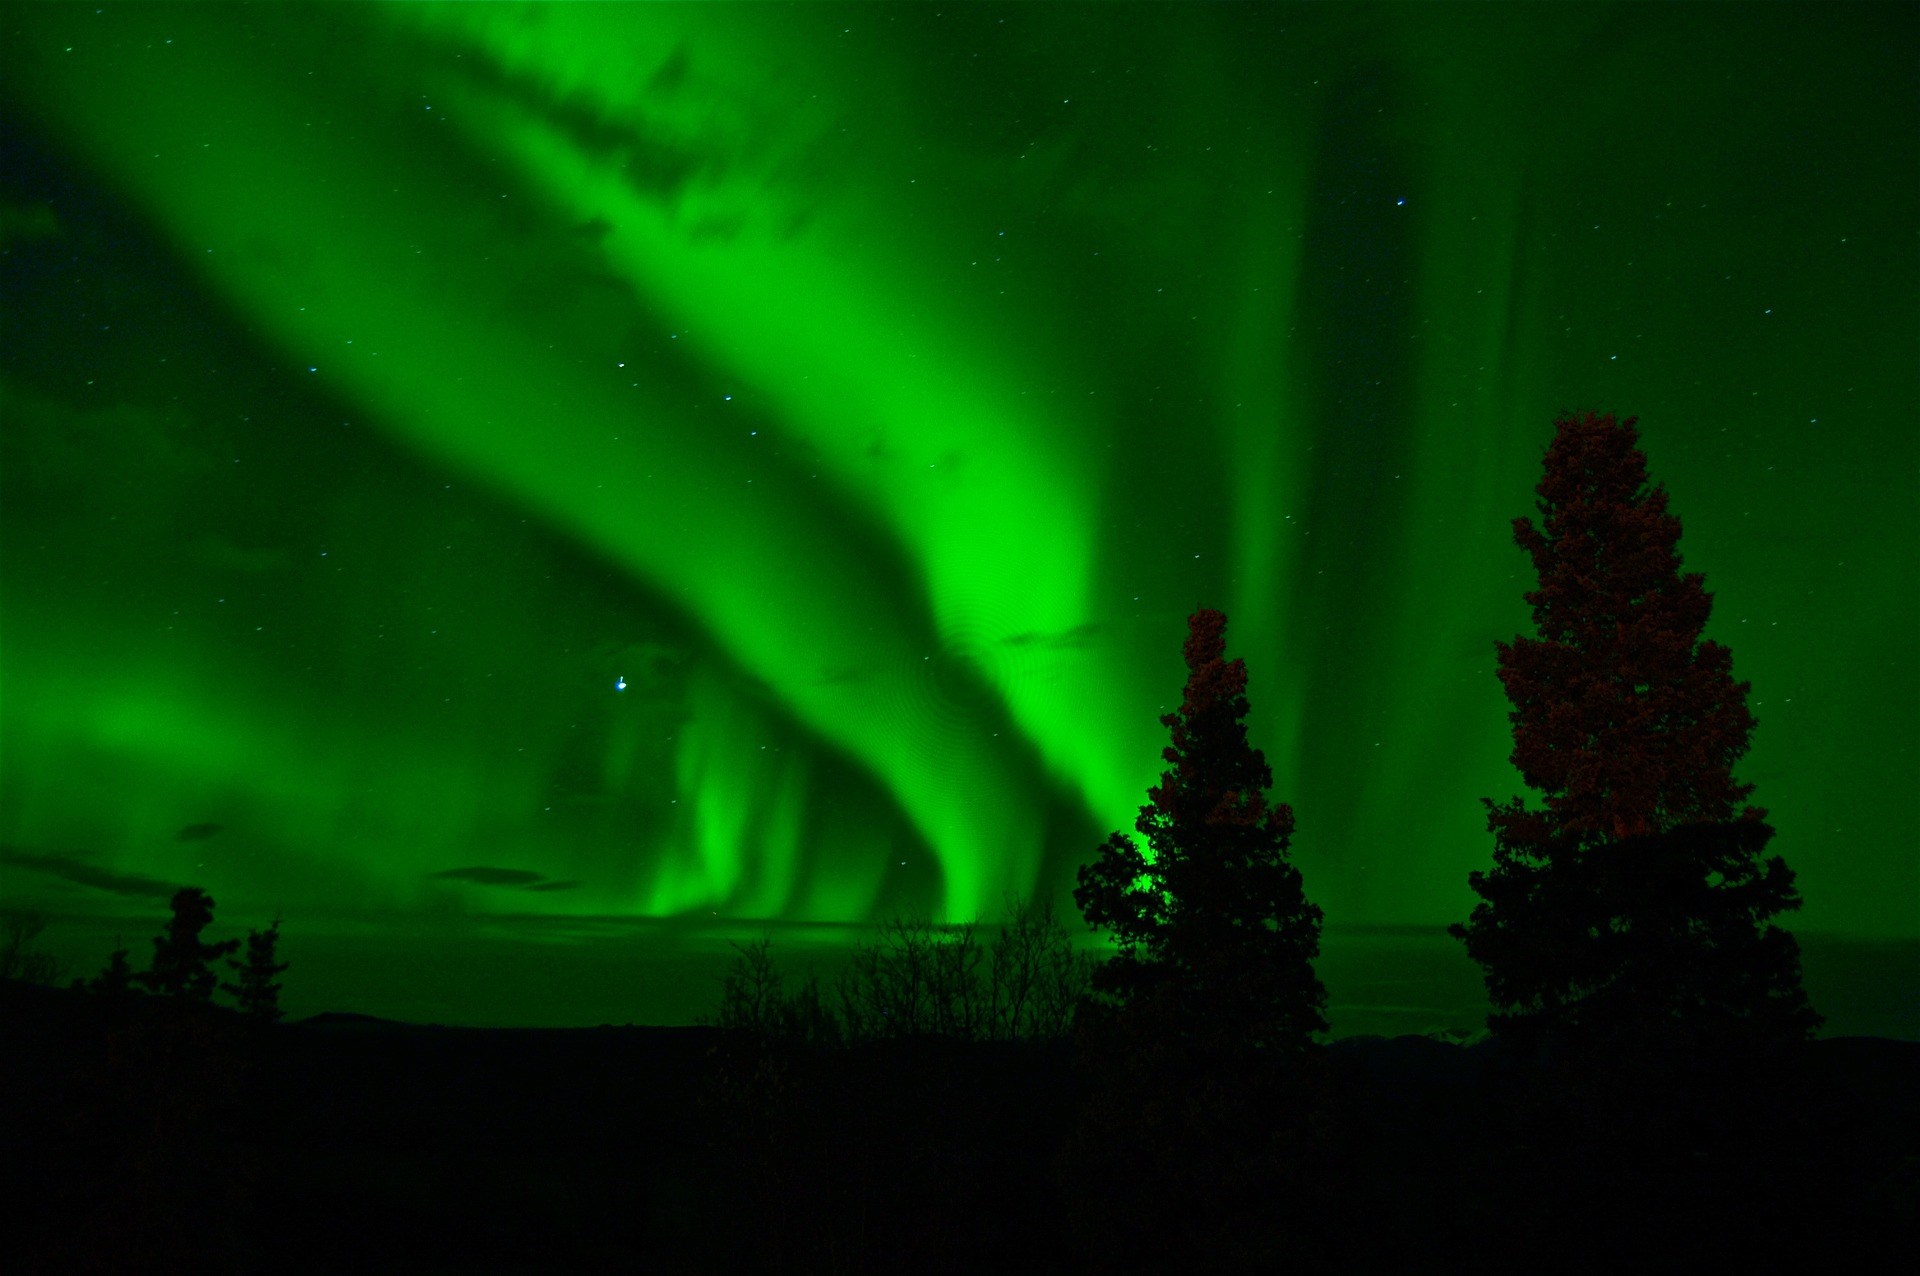 A chance to see the Northern Lights? - WNEM TV 51920 x 1276